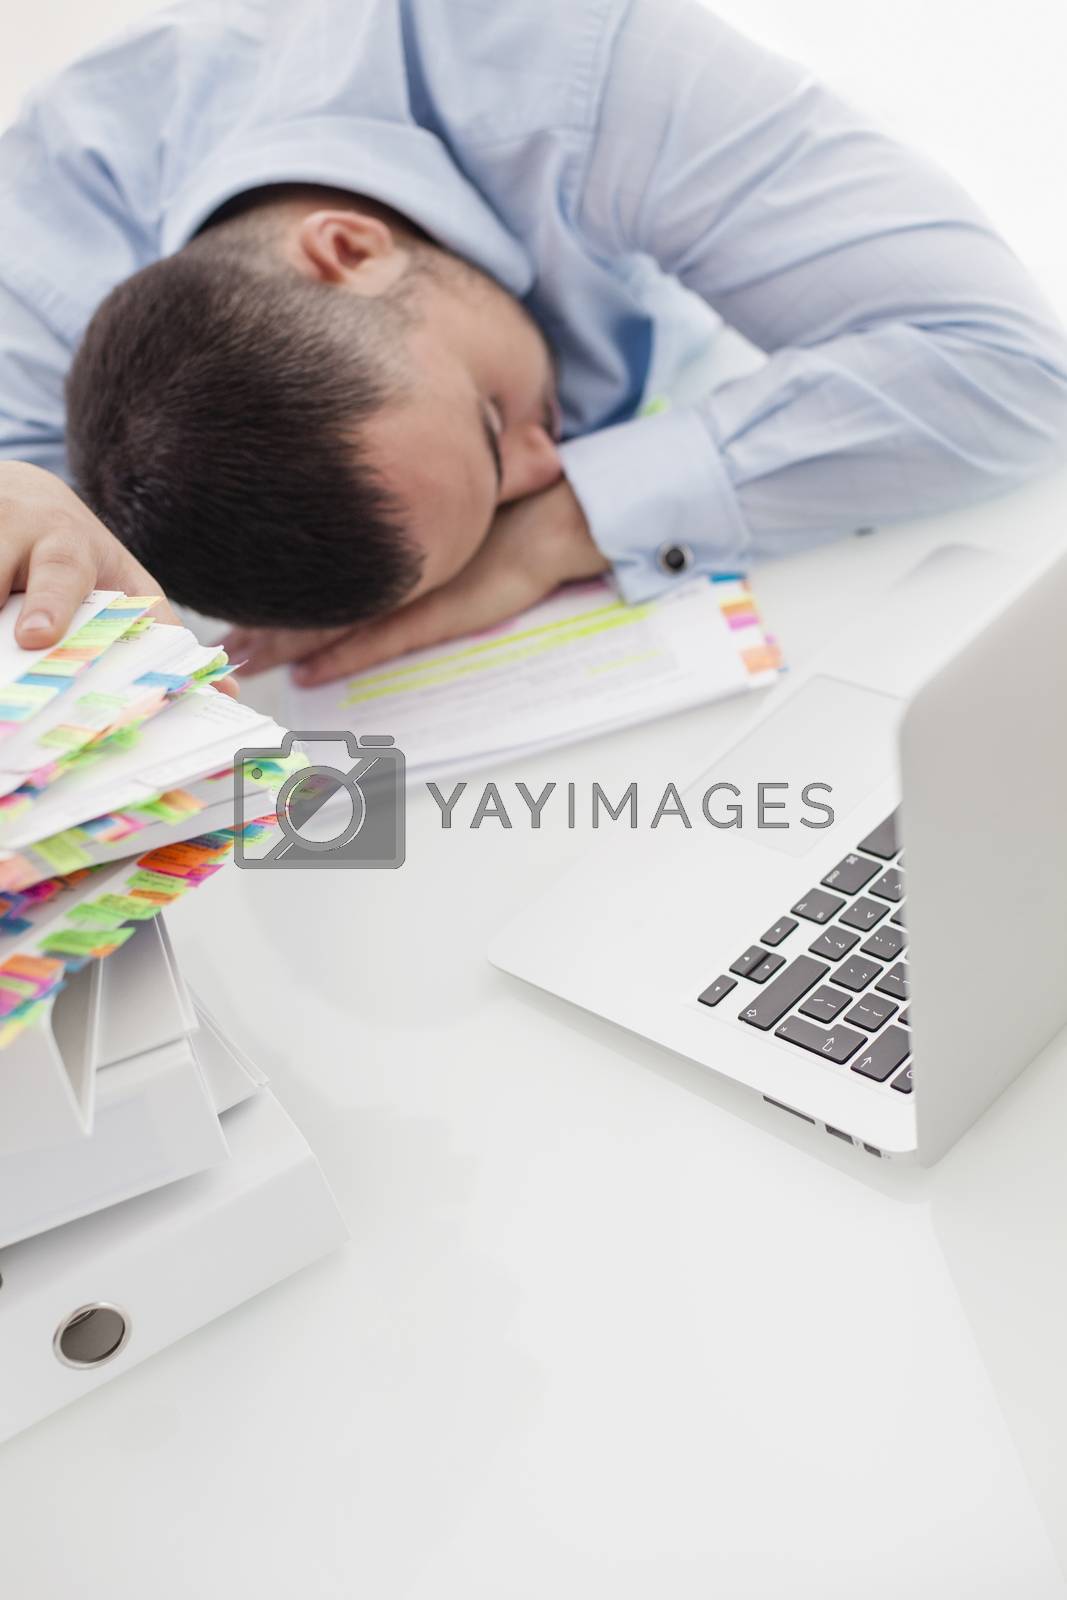 Royalty free image of Close-up view of Caucasian businessman asleep at his desk by moodboard